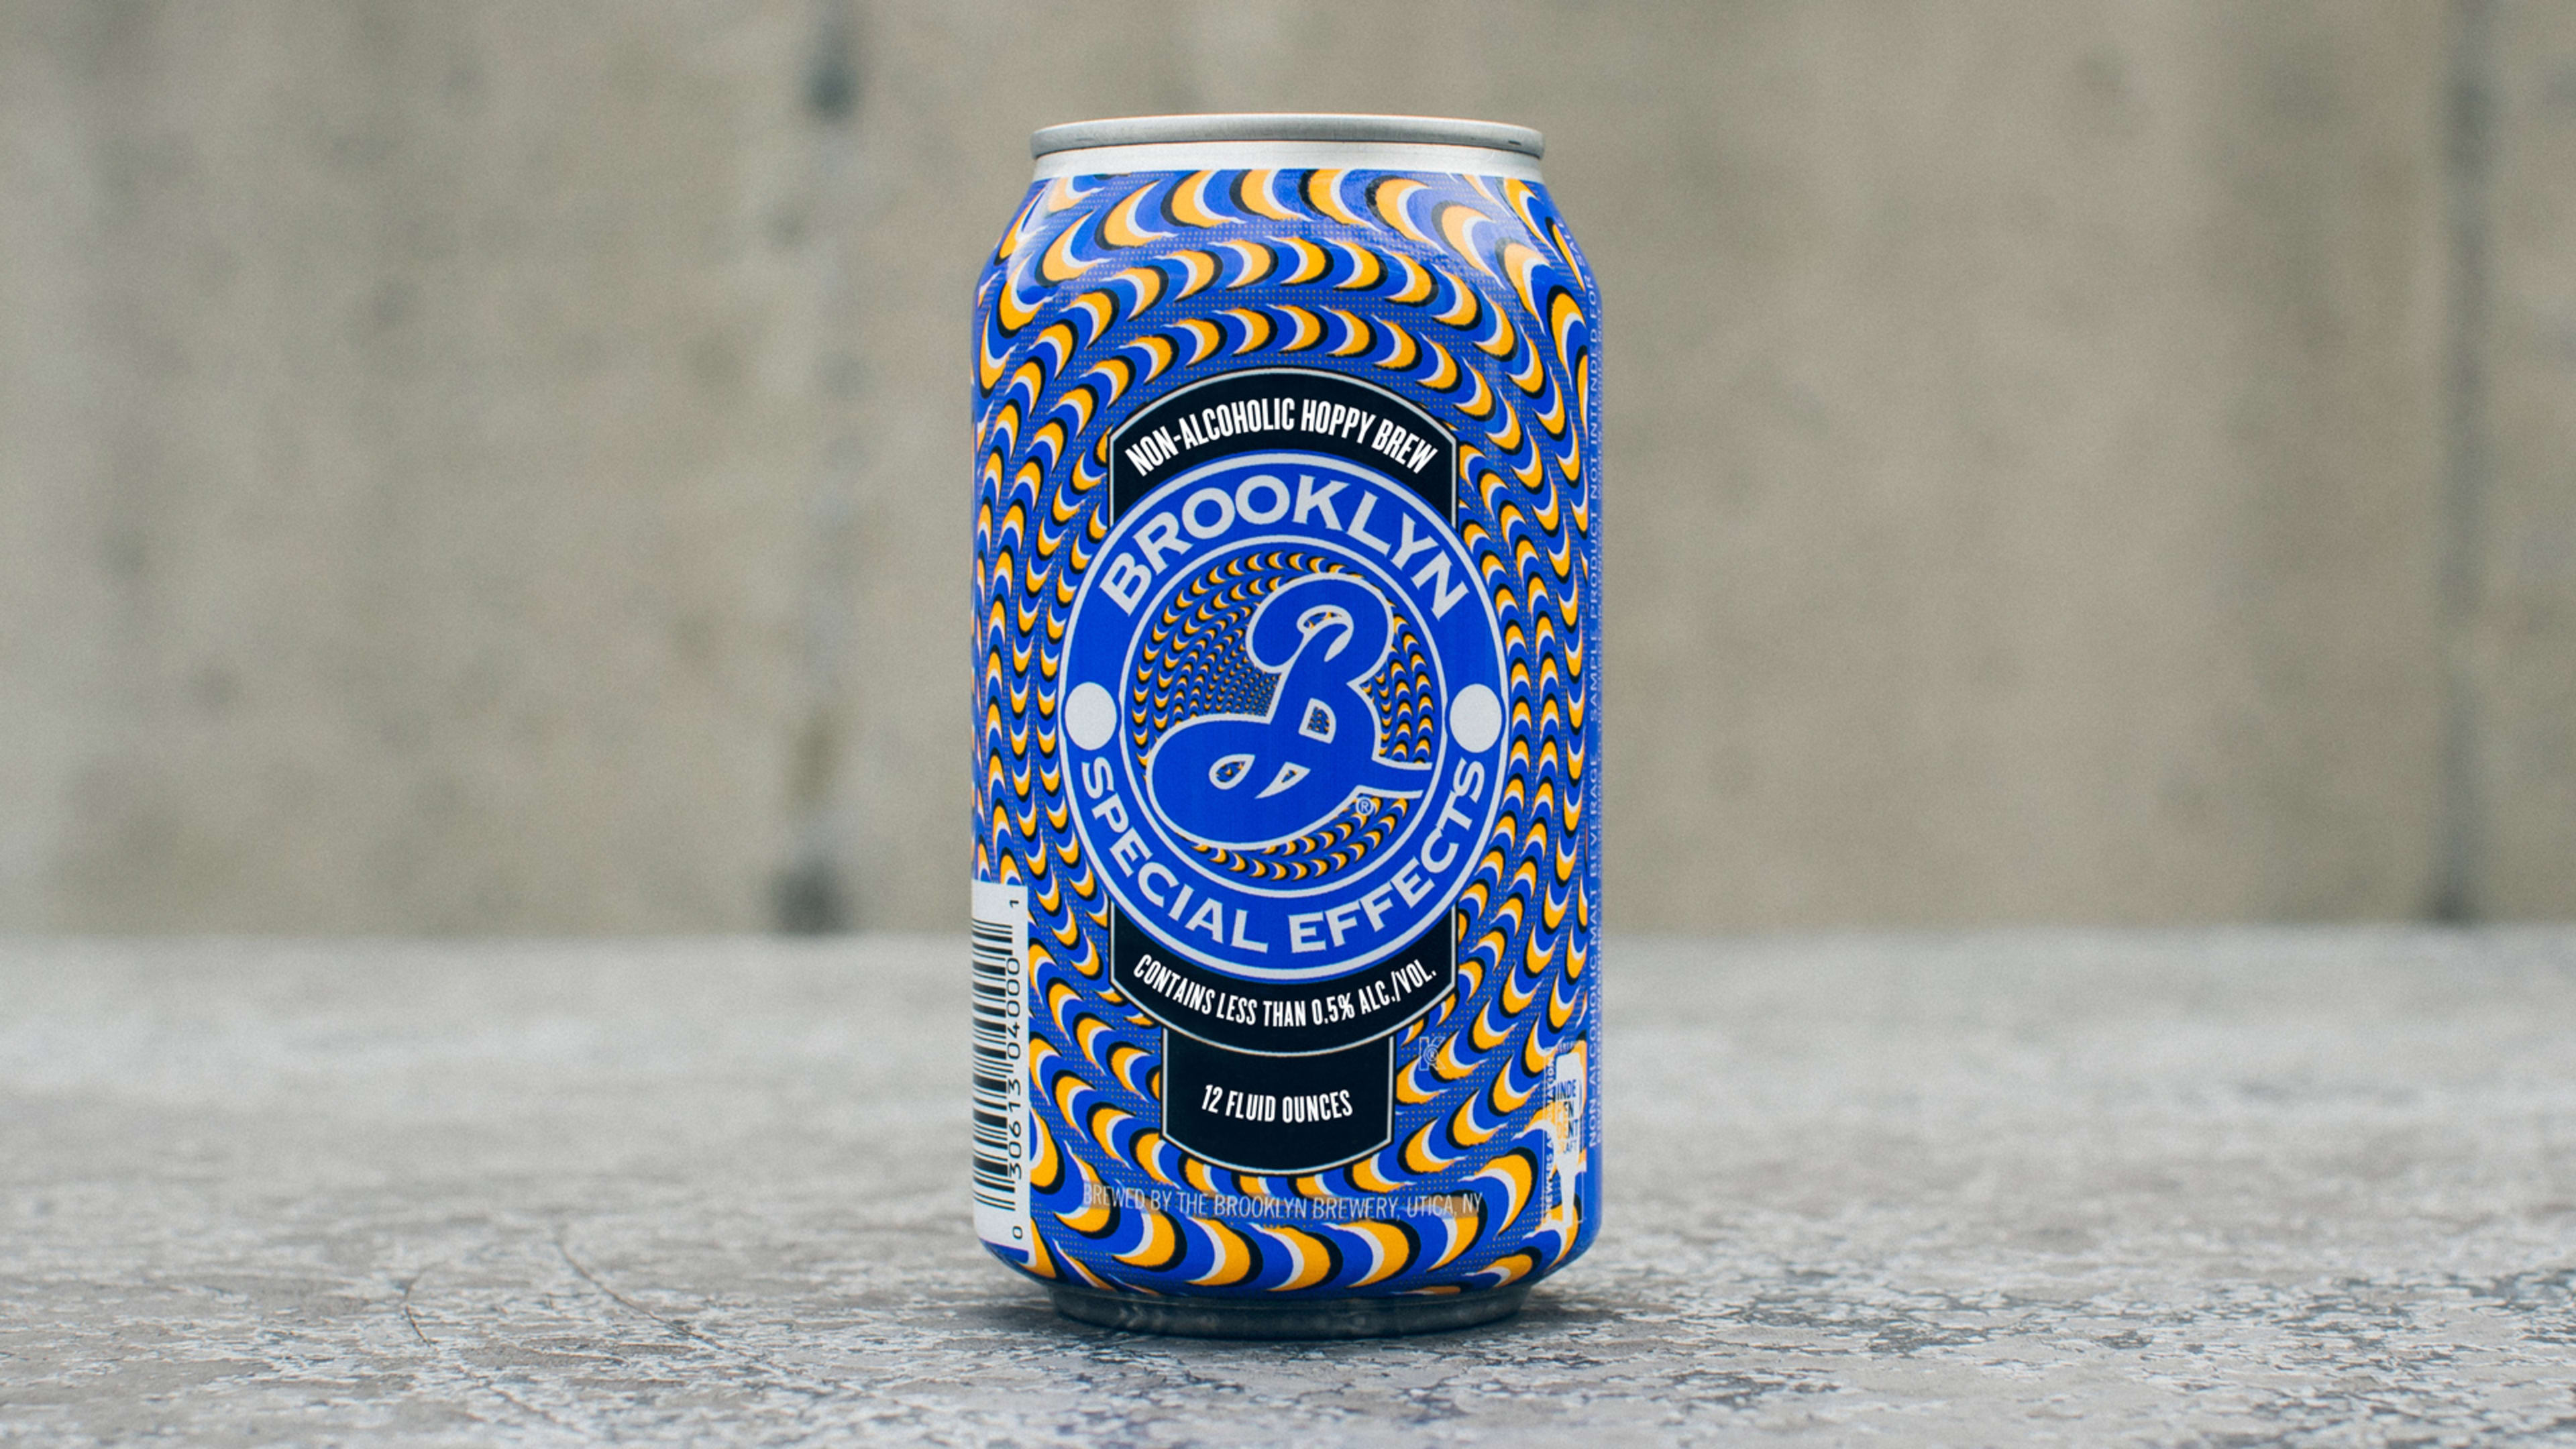 As drinking declines, nonalcoholic beer gets a slick rebrand